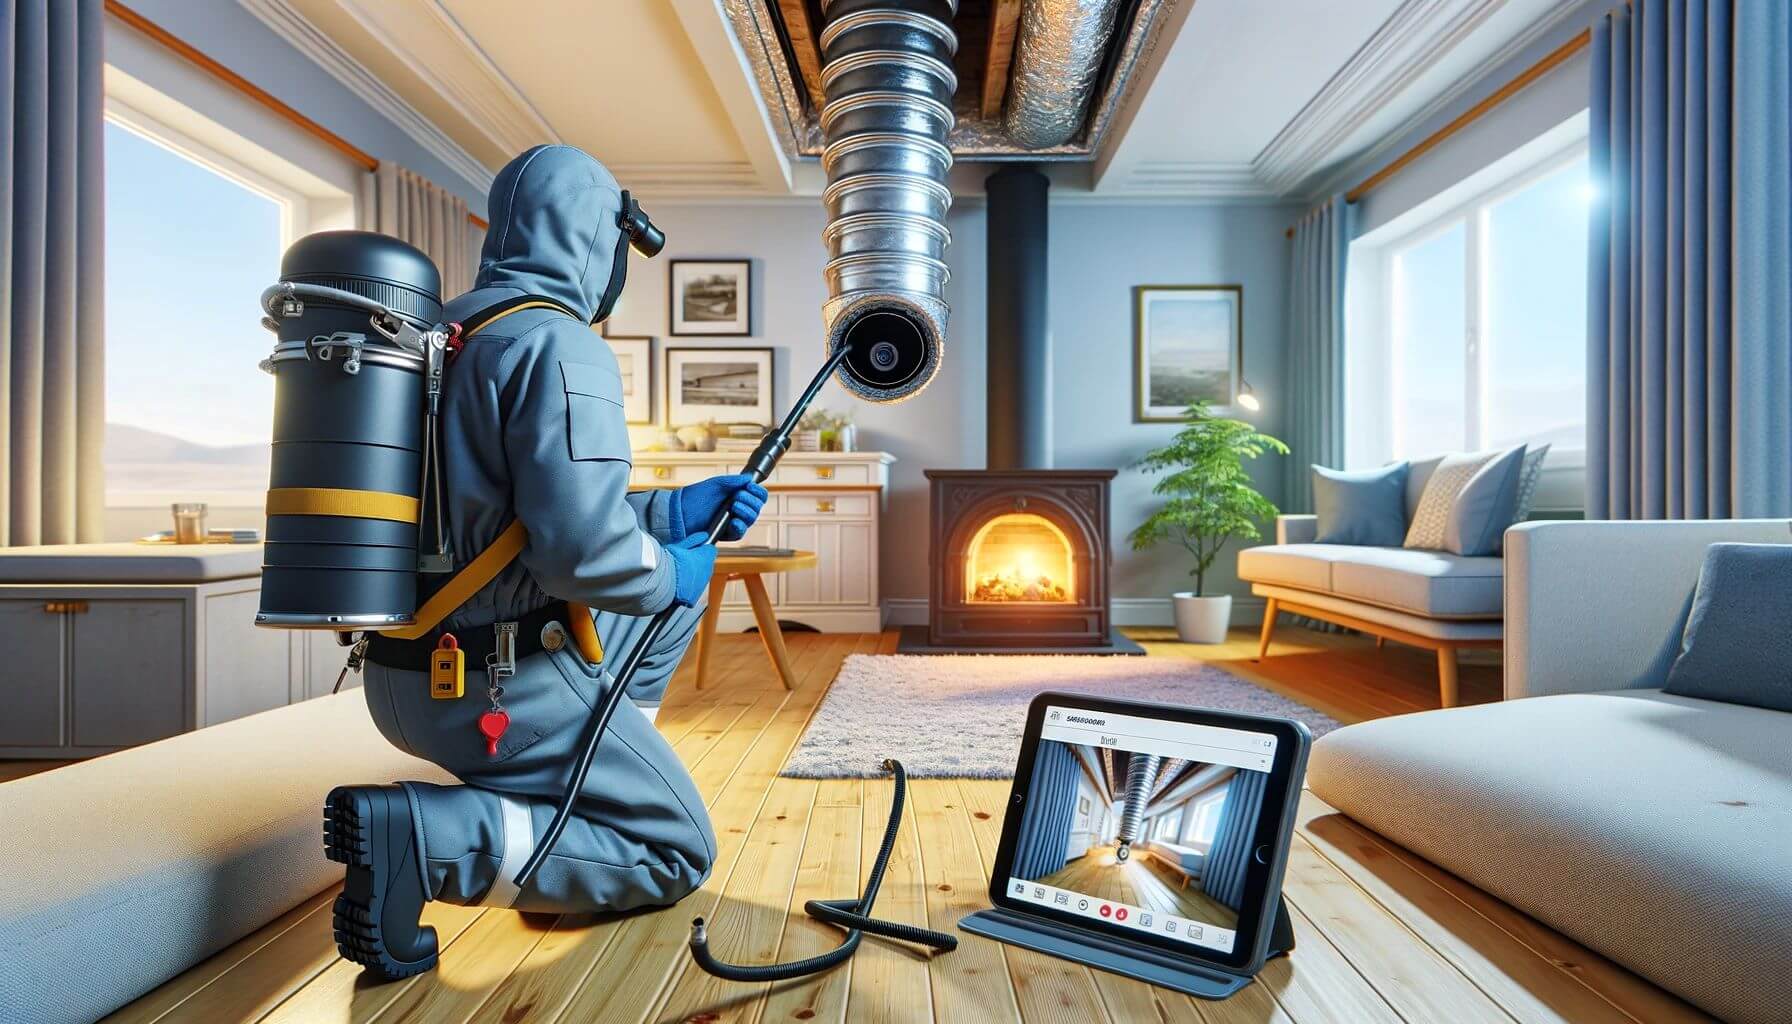 Guide to Chimney Inspection Cameras